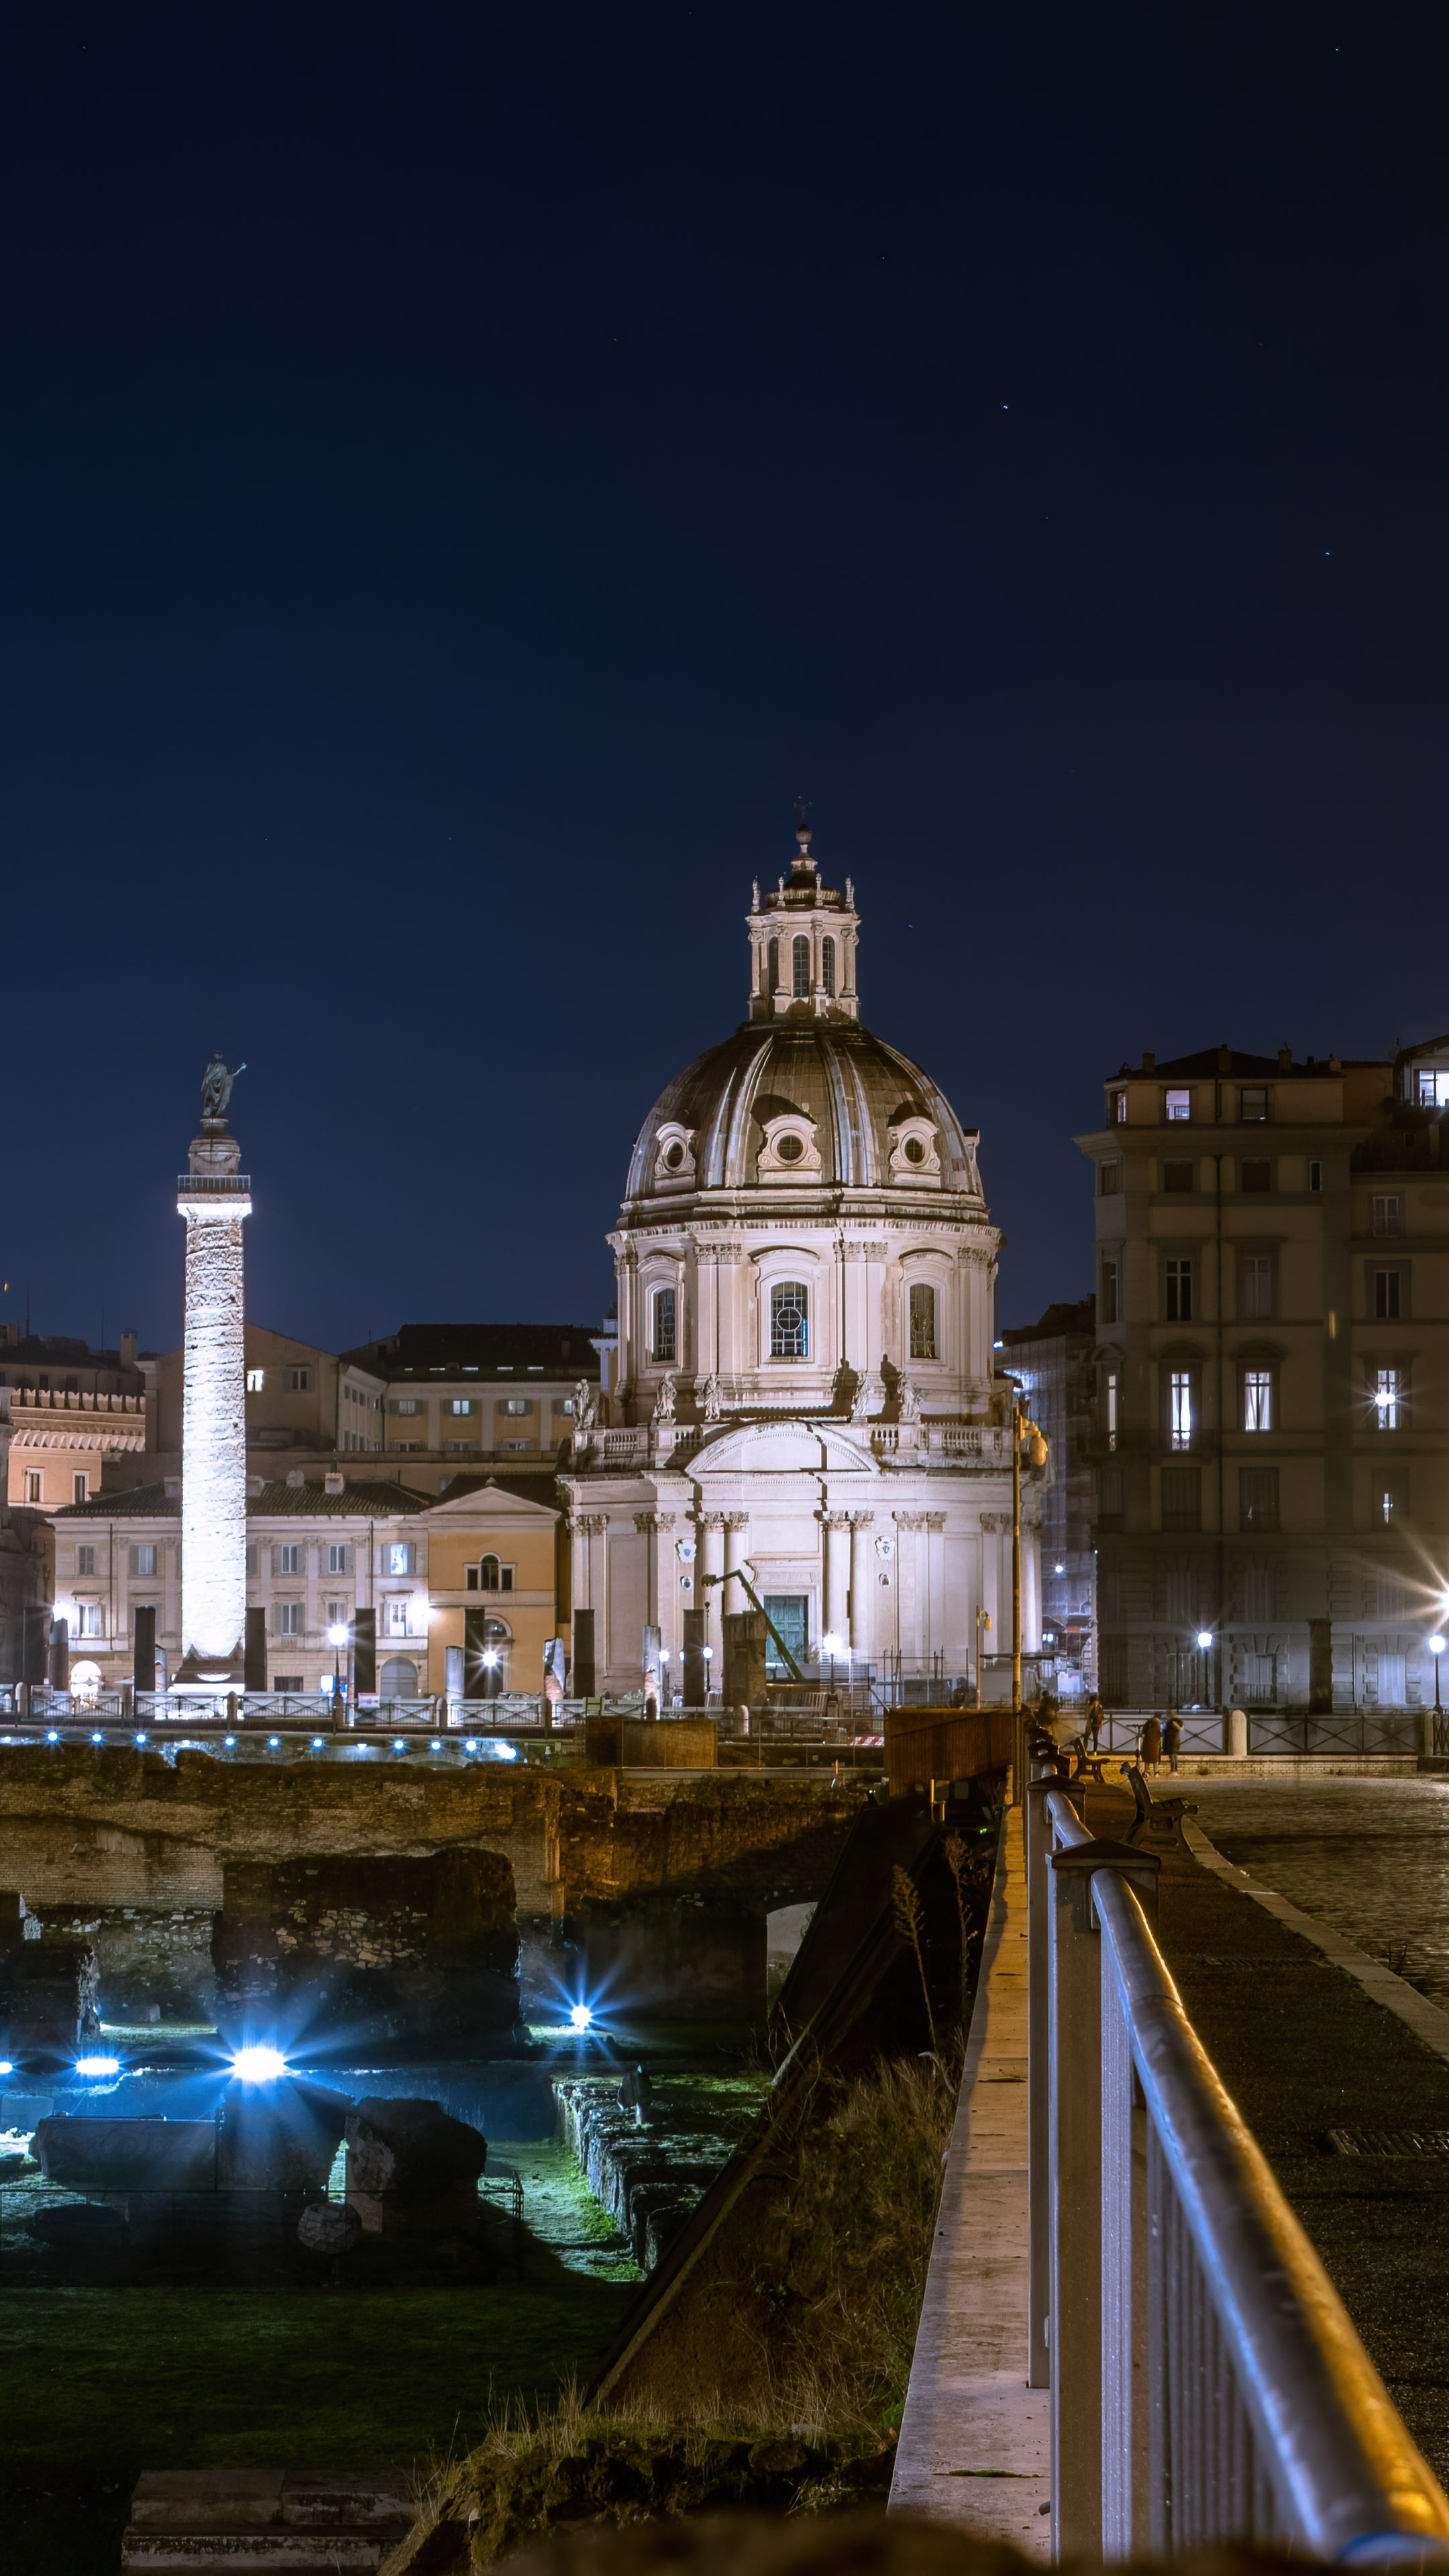 Capture the beauty of Rome's architecture at night with this stunning wallpaper